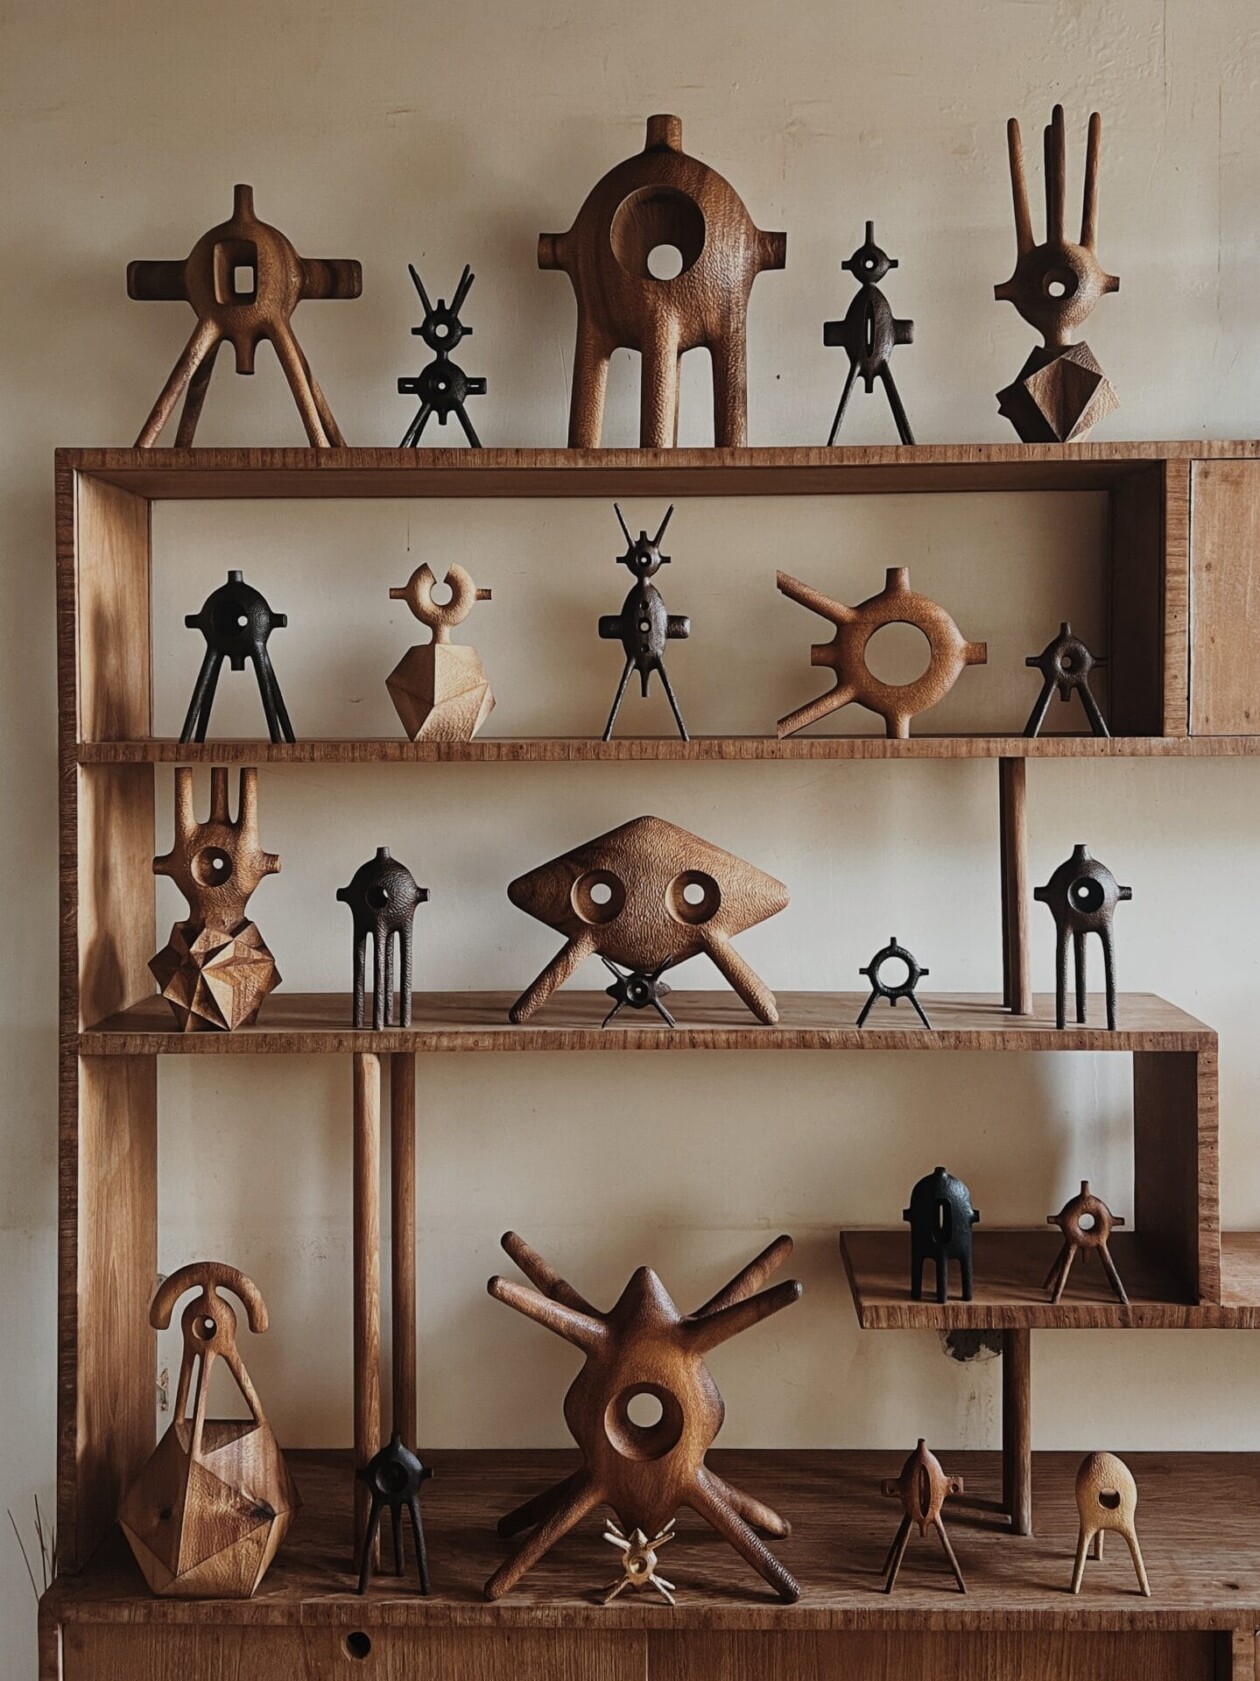 Intriguing Geometric Wood Sculptures By Aleph Geddis (3)